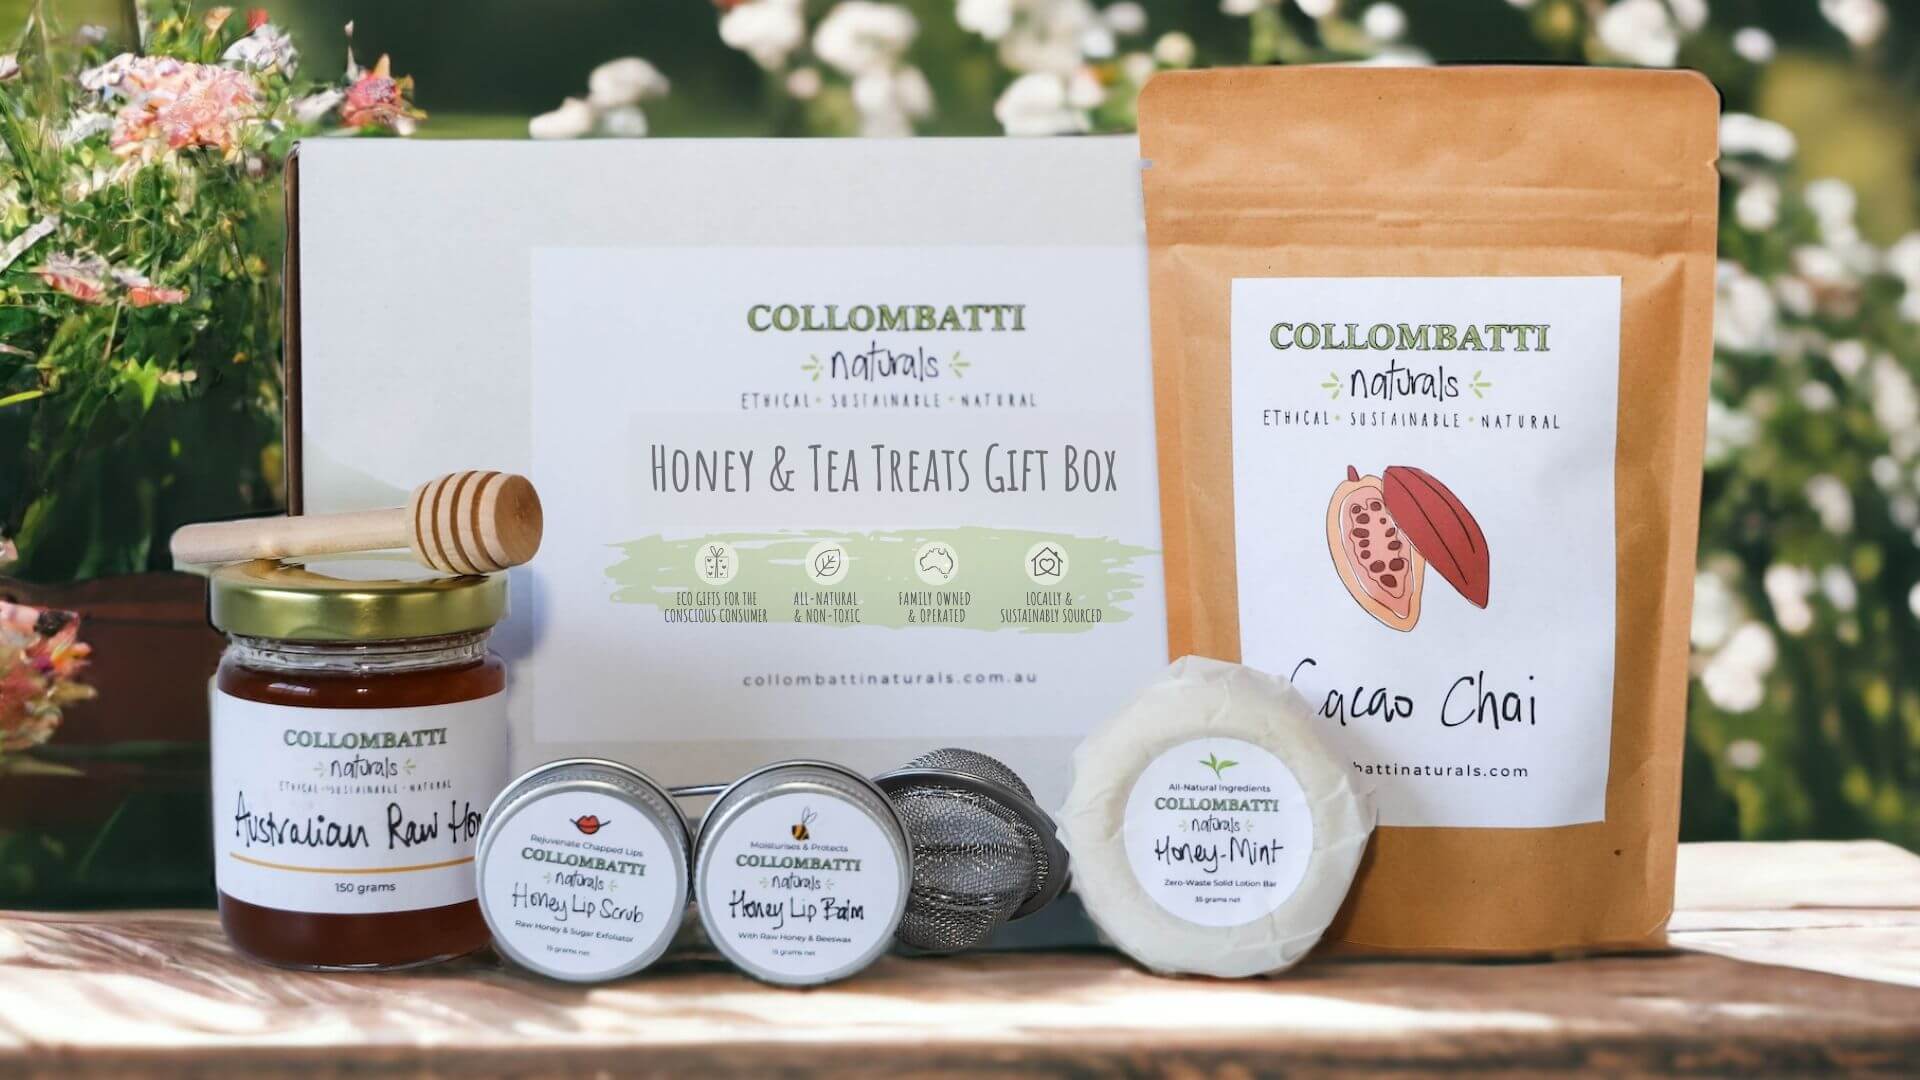 Collombatti Naturals Honey and Tea treats gift box for sustainably made eco friendly gifting